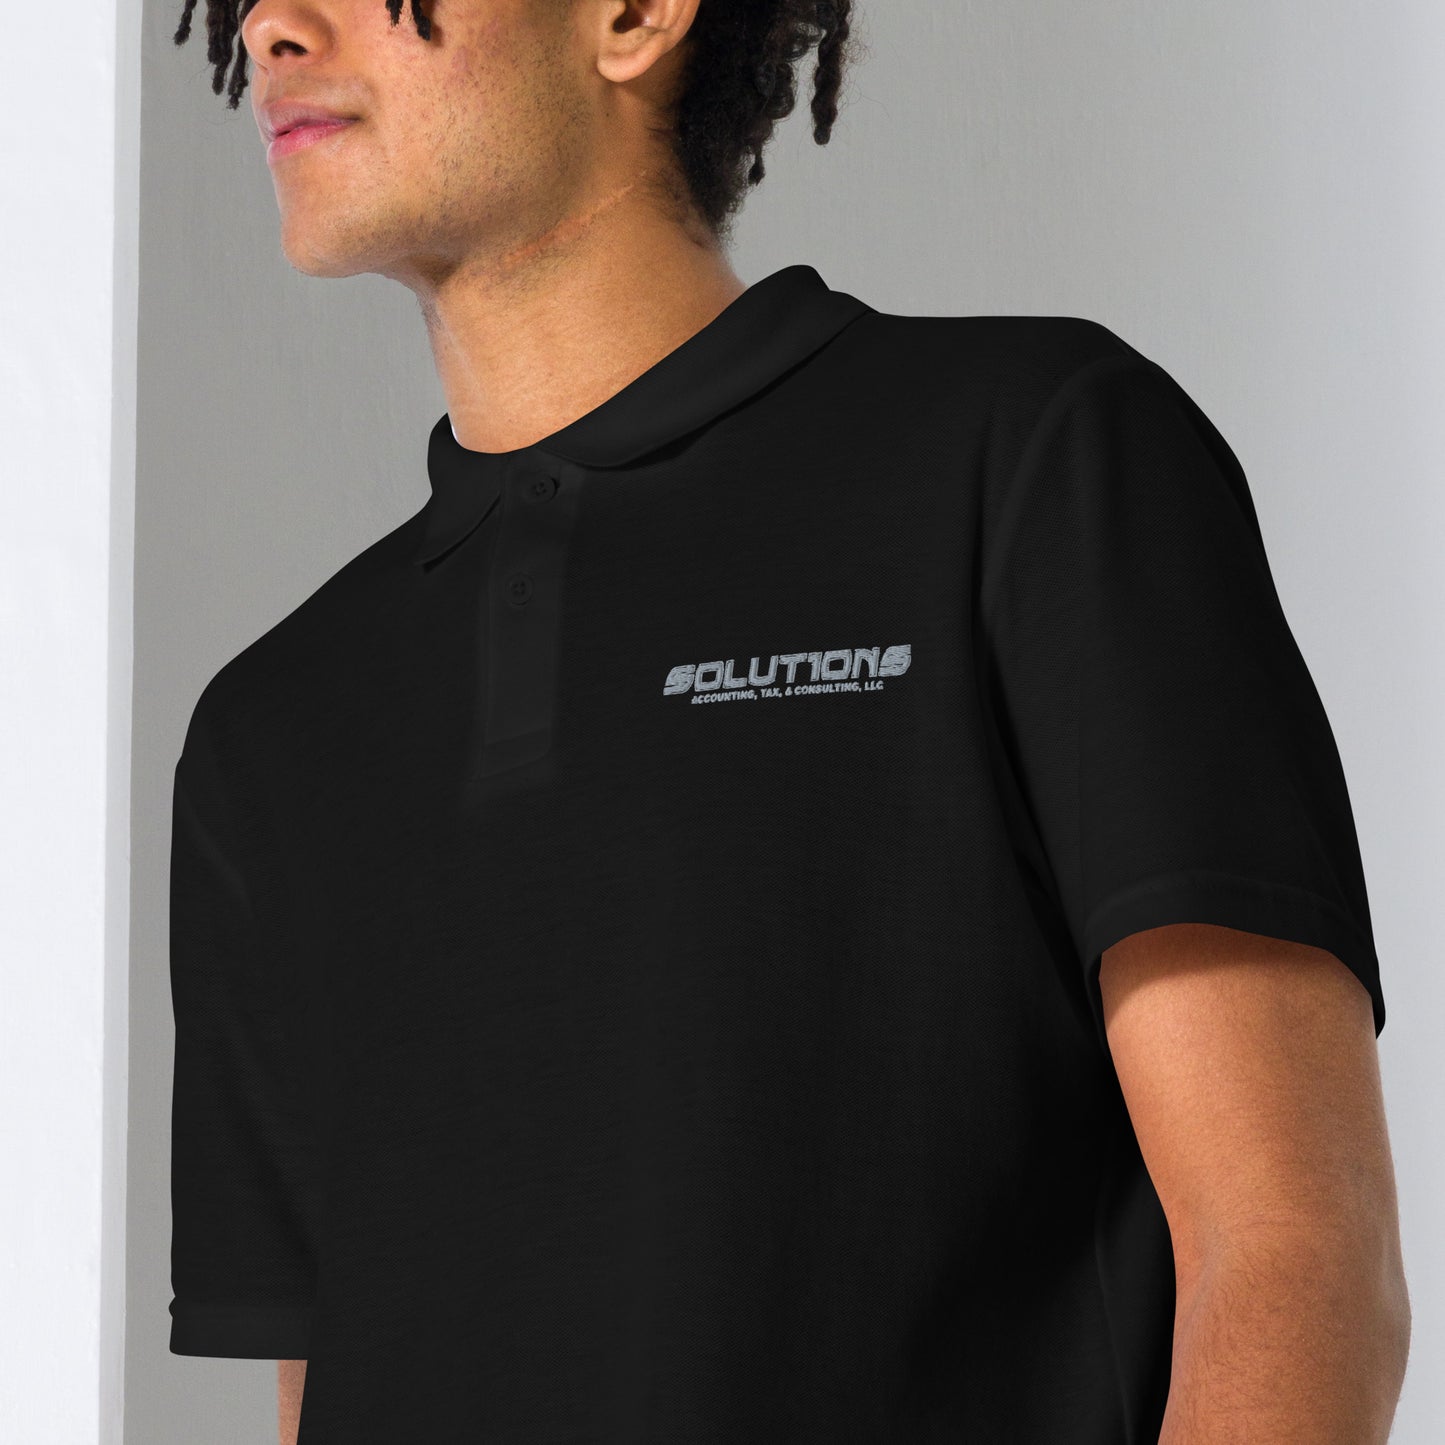 Solutions polo shirt no Background